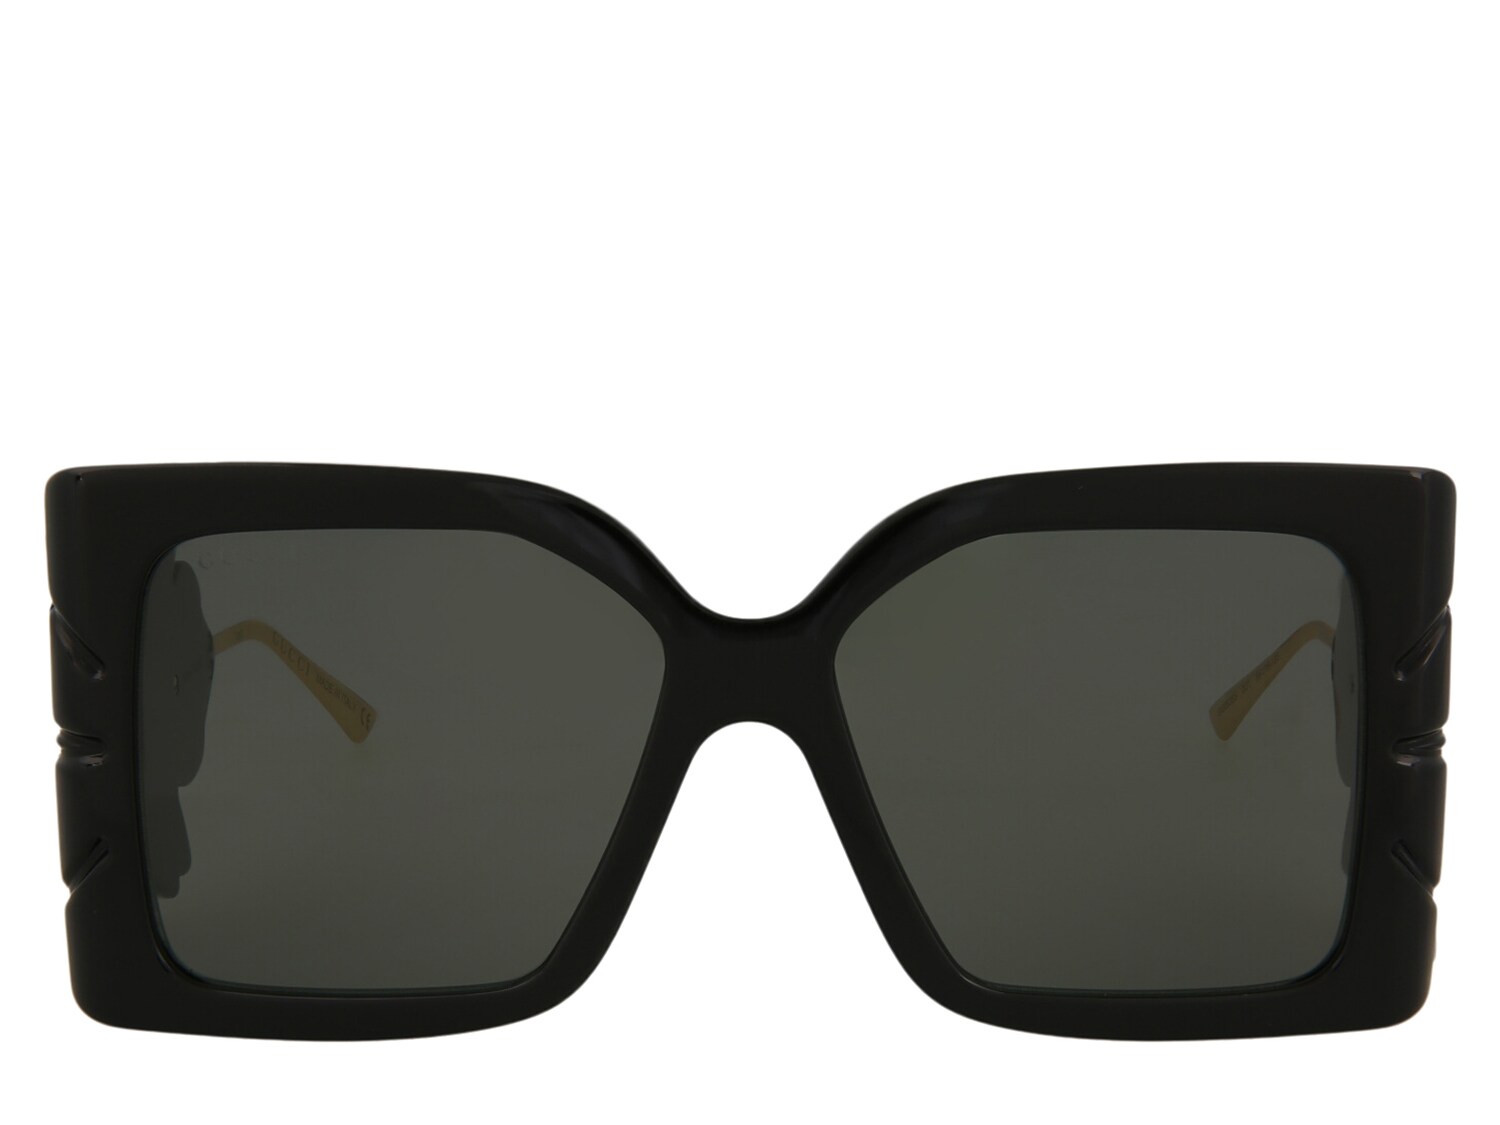 Gucci Square Leaf Oversized Sunglasses - FINAL SALE - Free Shipping | DSW